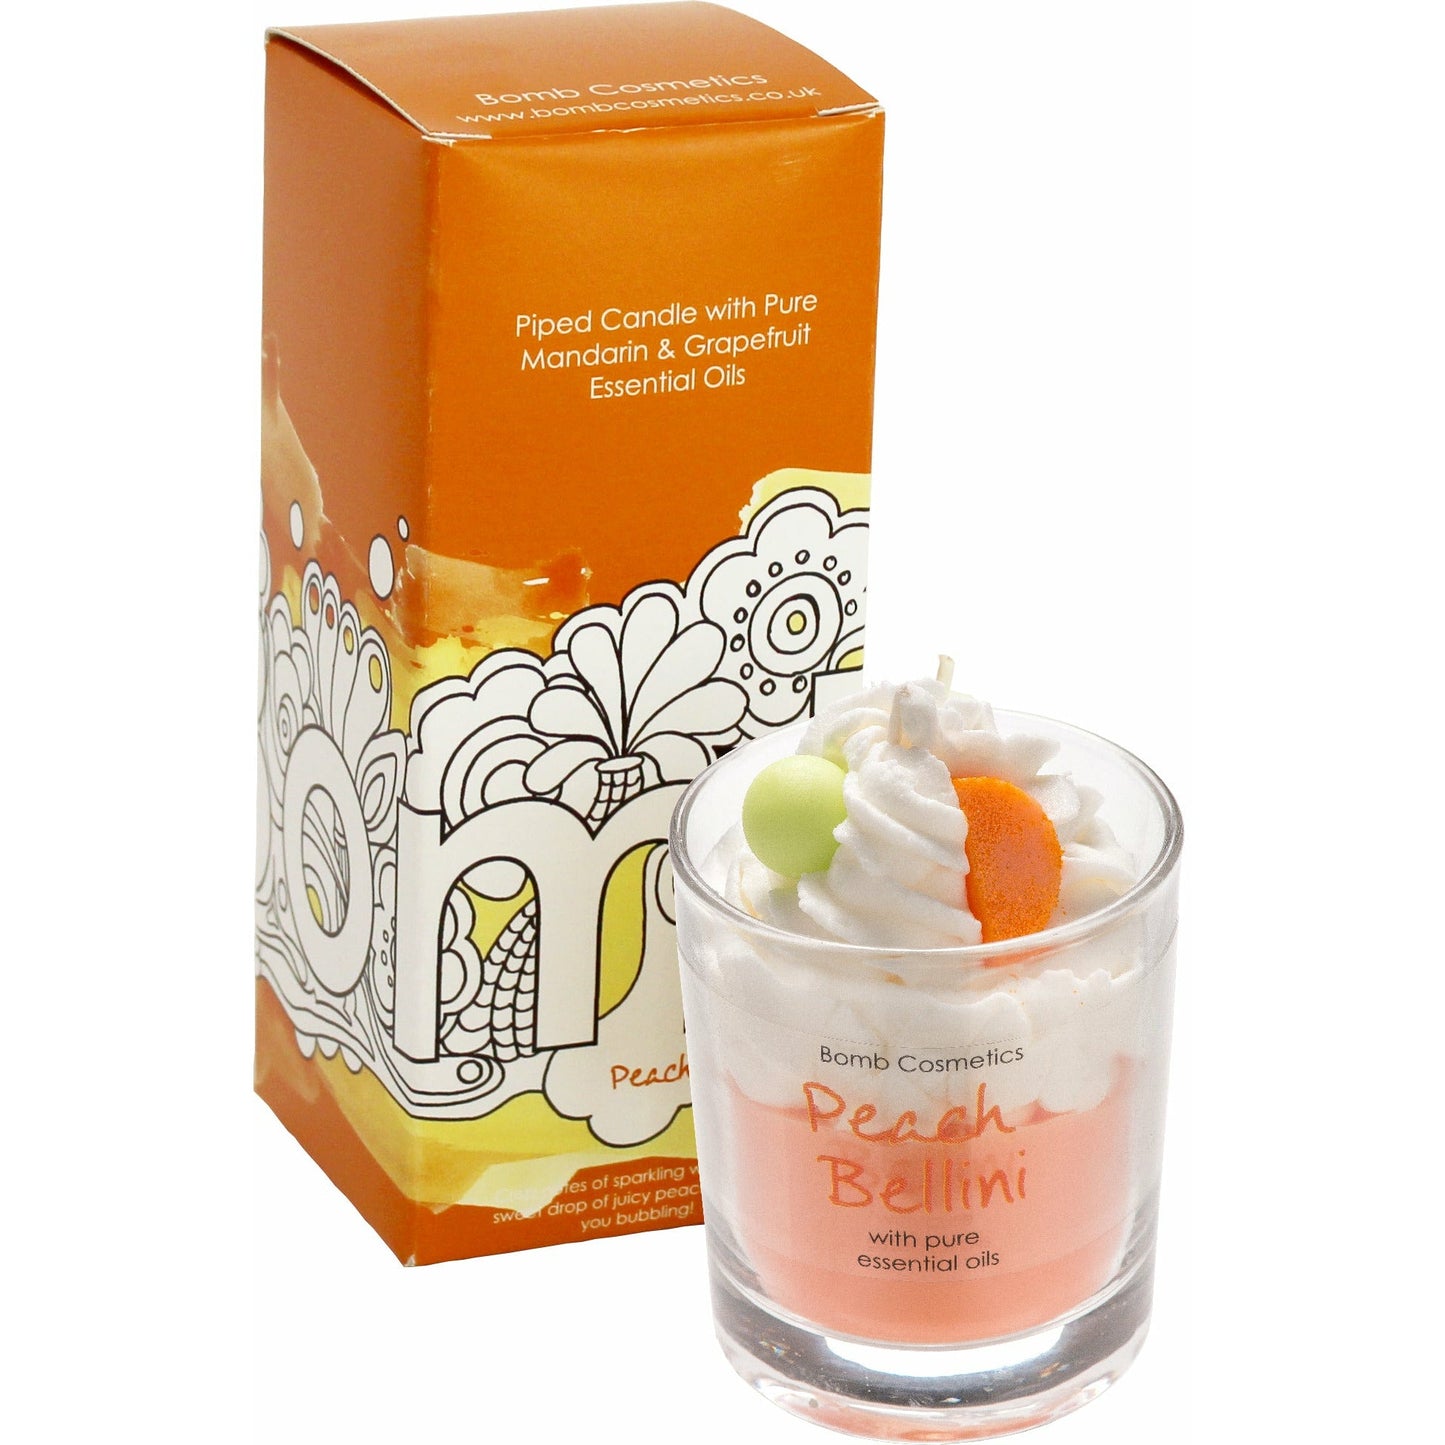 Peach Belini Piped Candle